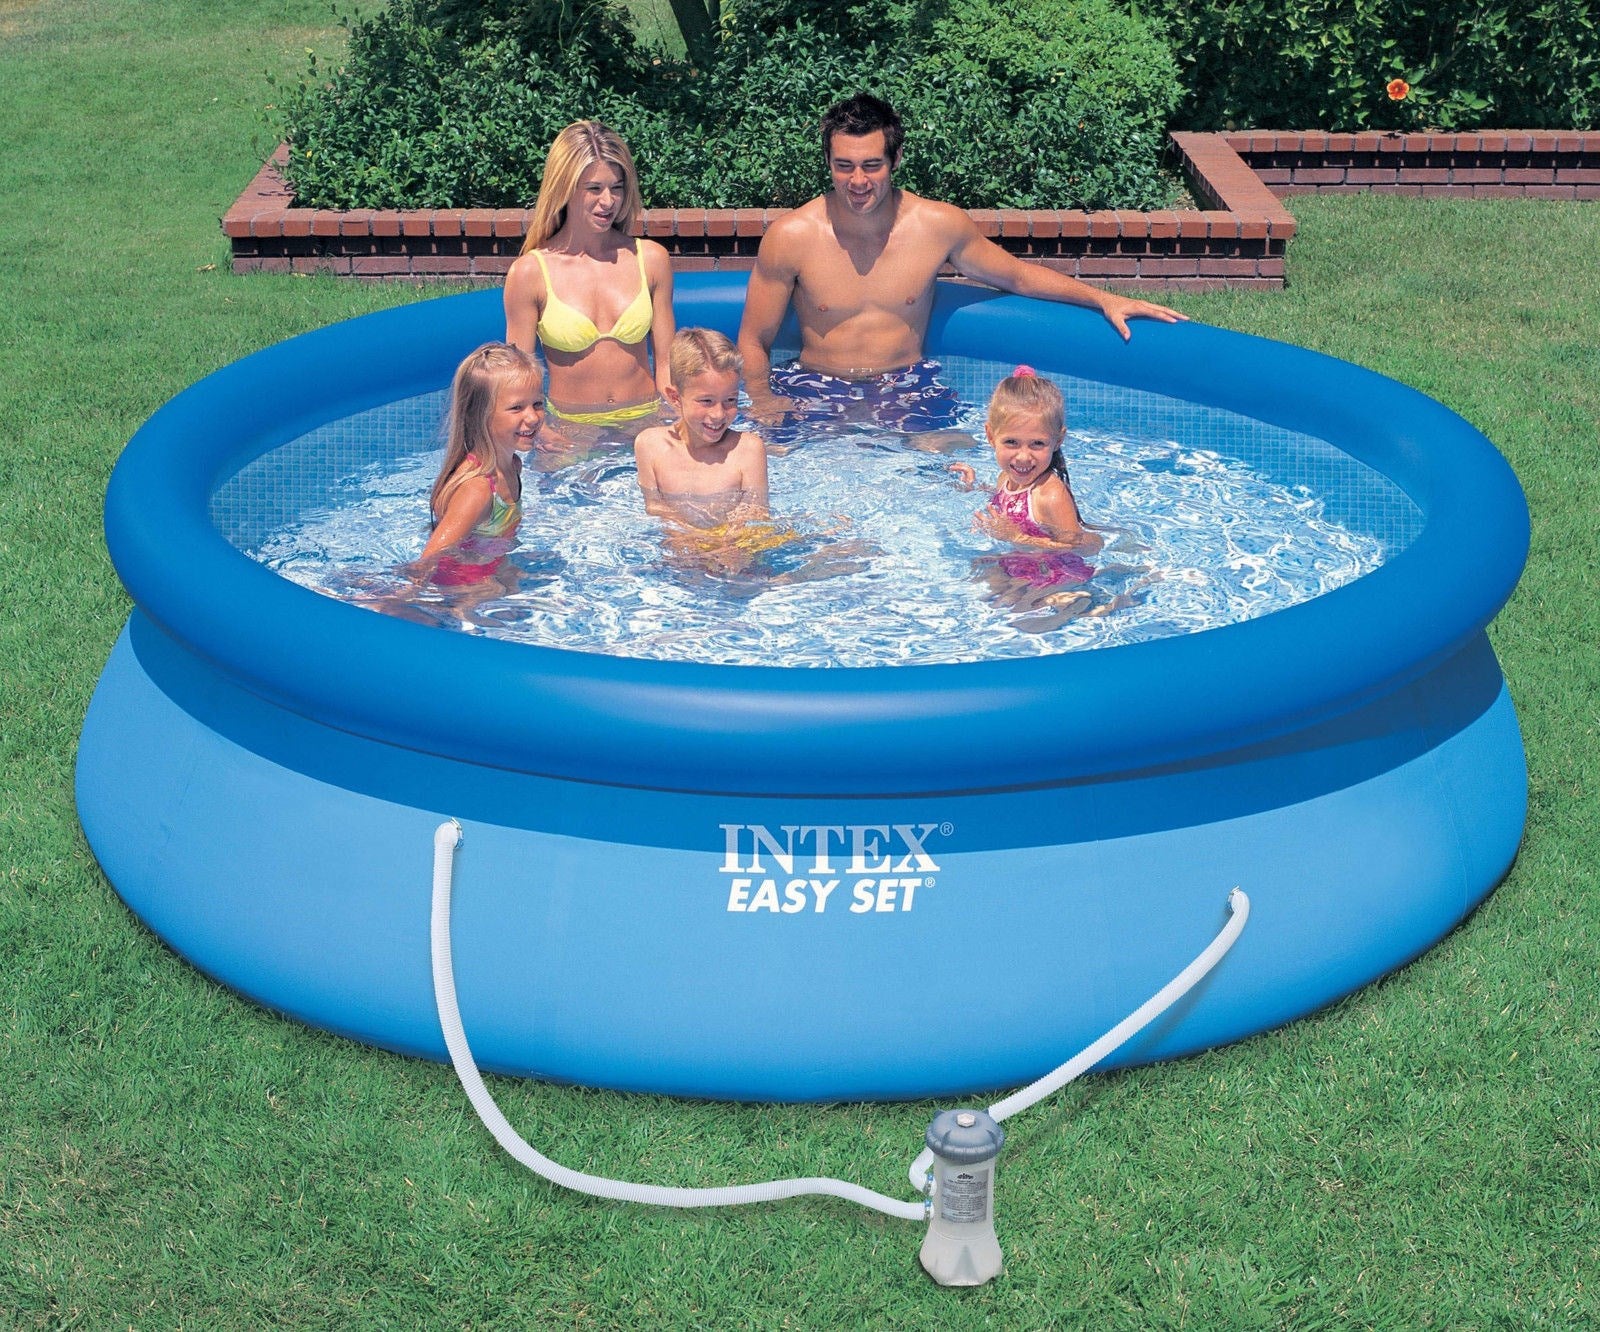 Intex Easy Set Swimming Pool With Filter Pump (13' x 33")